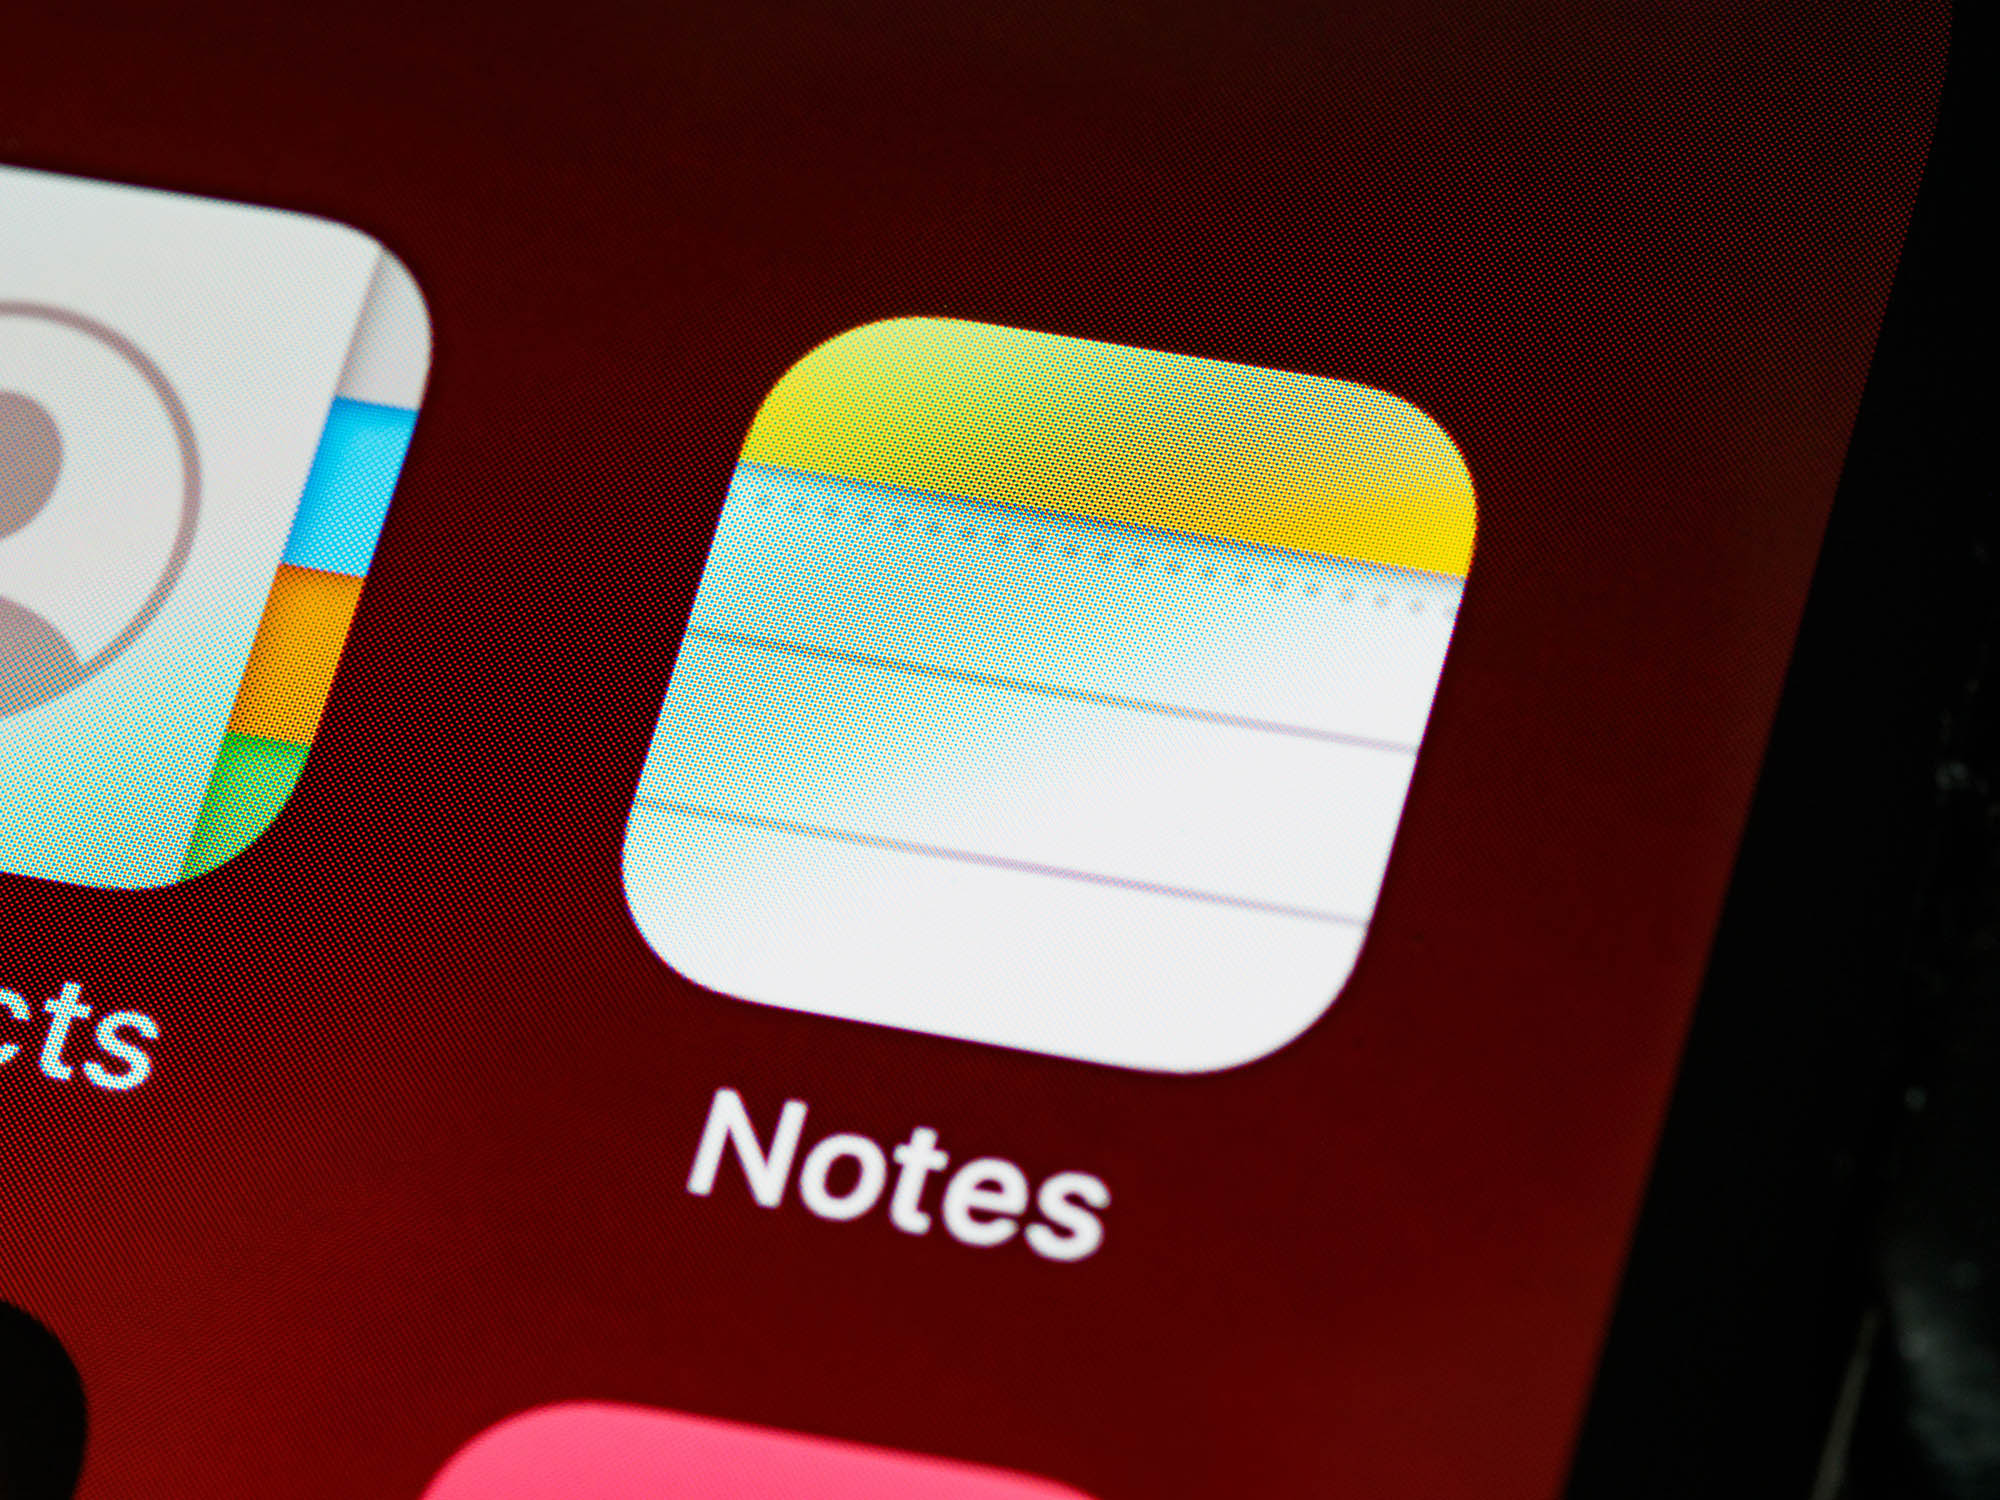 Notes app on iphone - how to write a travel journal article